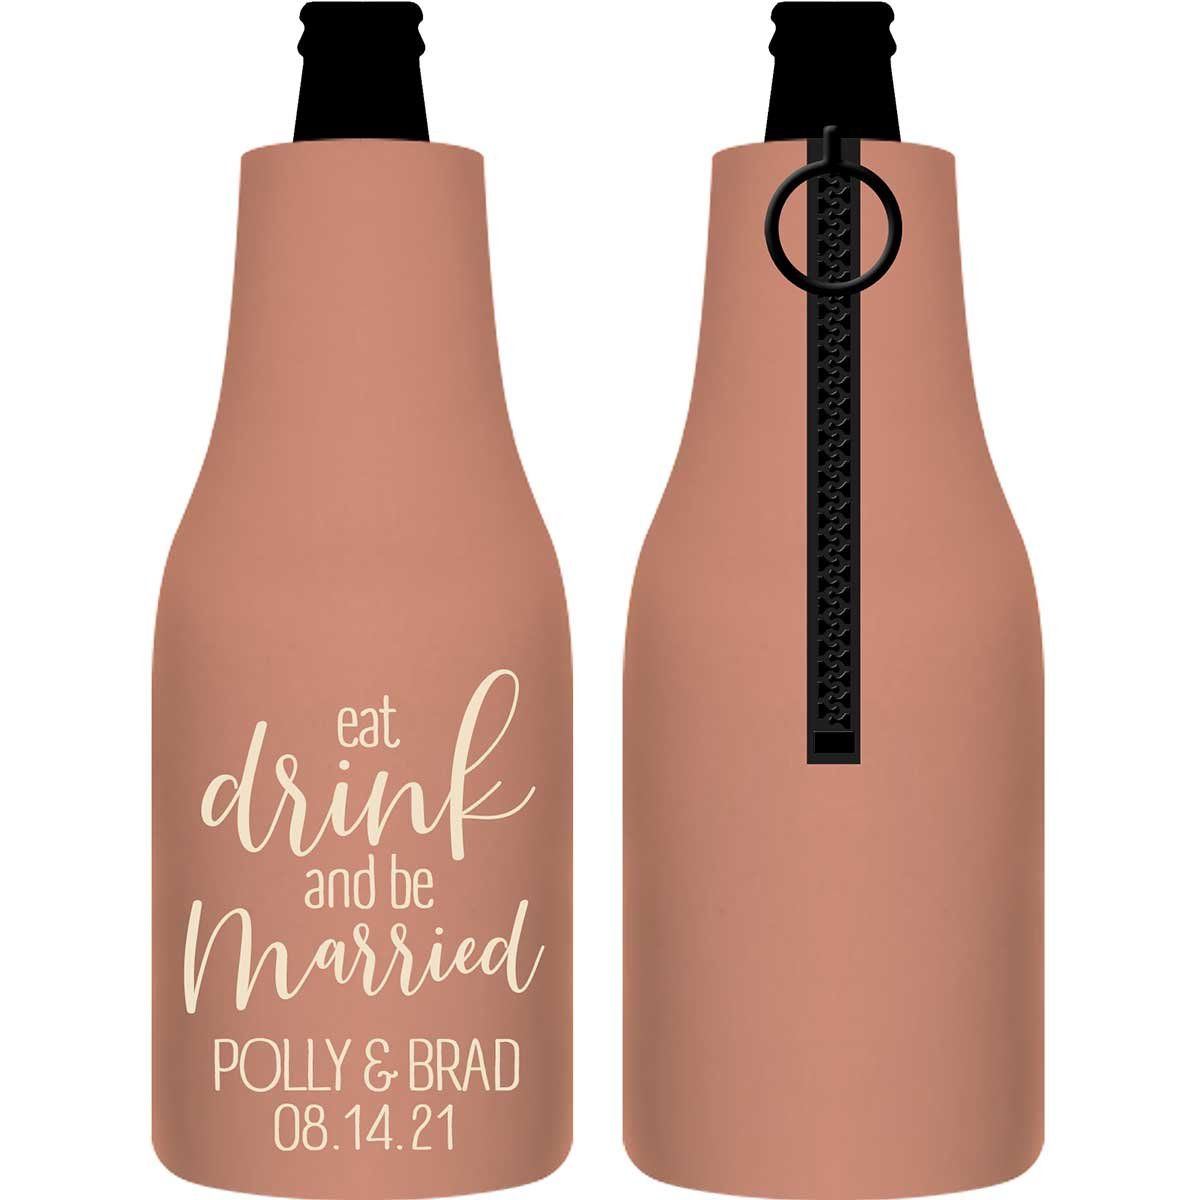 Eat Drink And Be Married 7A Foldable Zippered Bottle Koozies Wedding Gifts for Guests